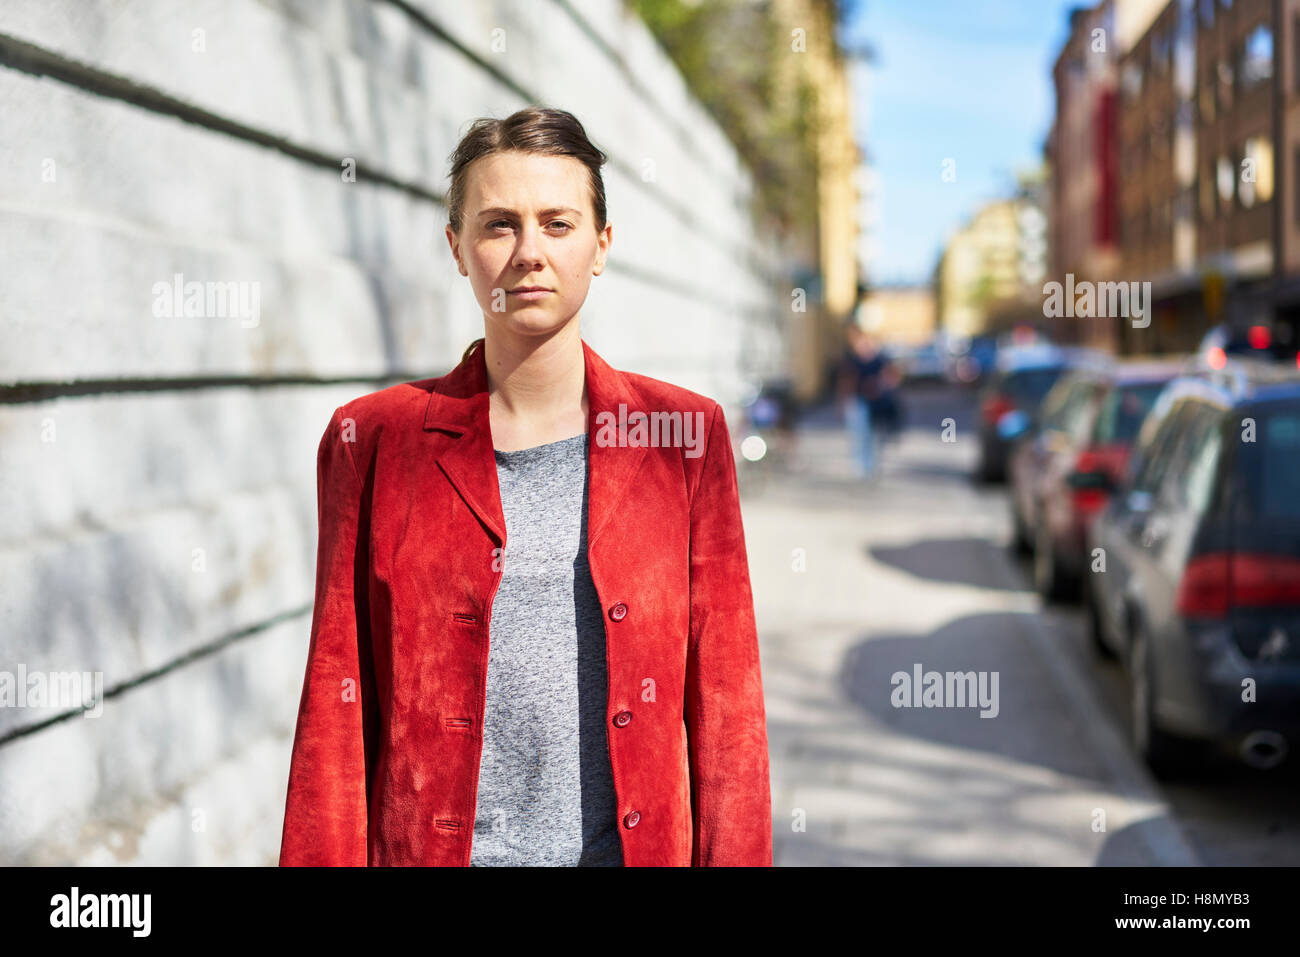 Woman in red jacket looking at camera Stock Photo